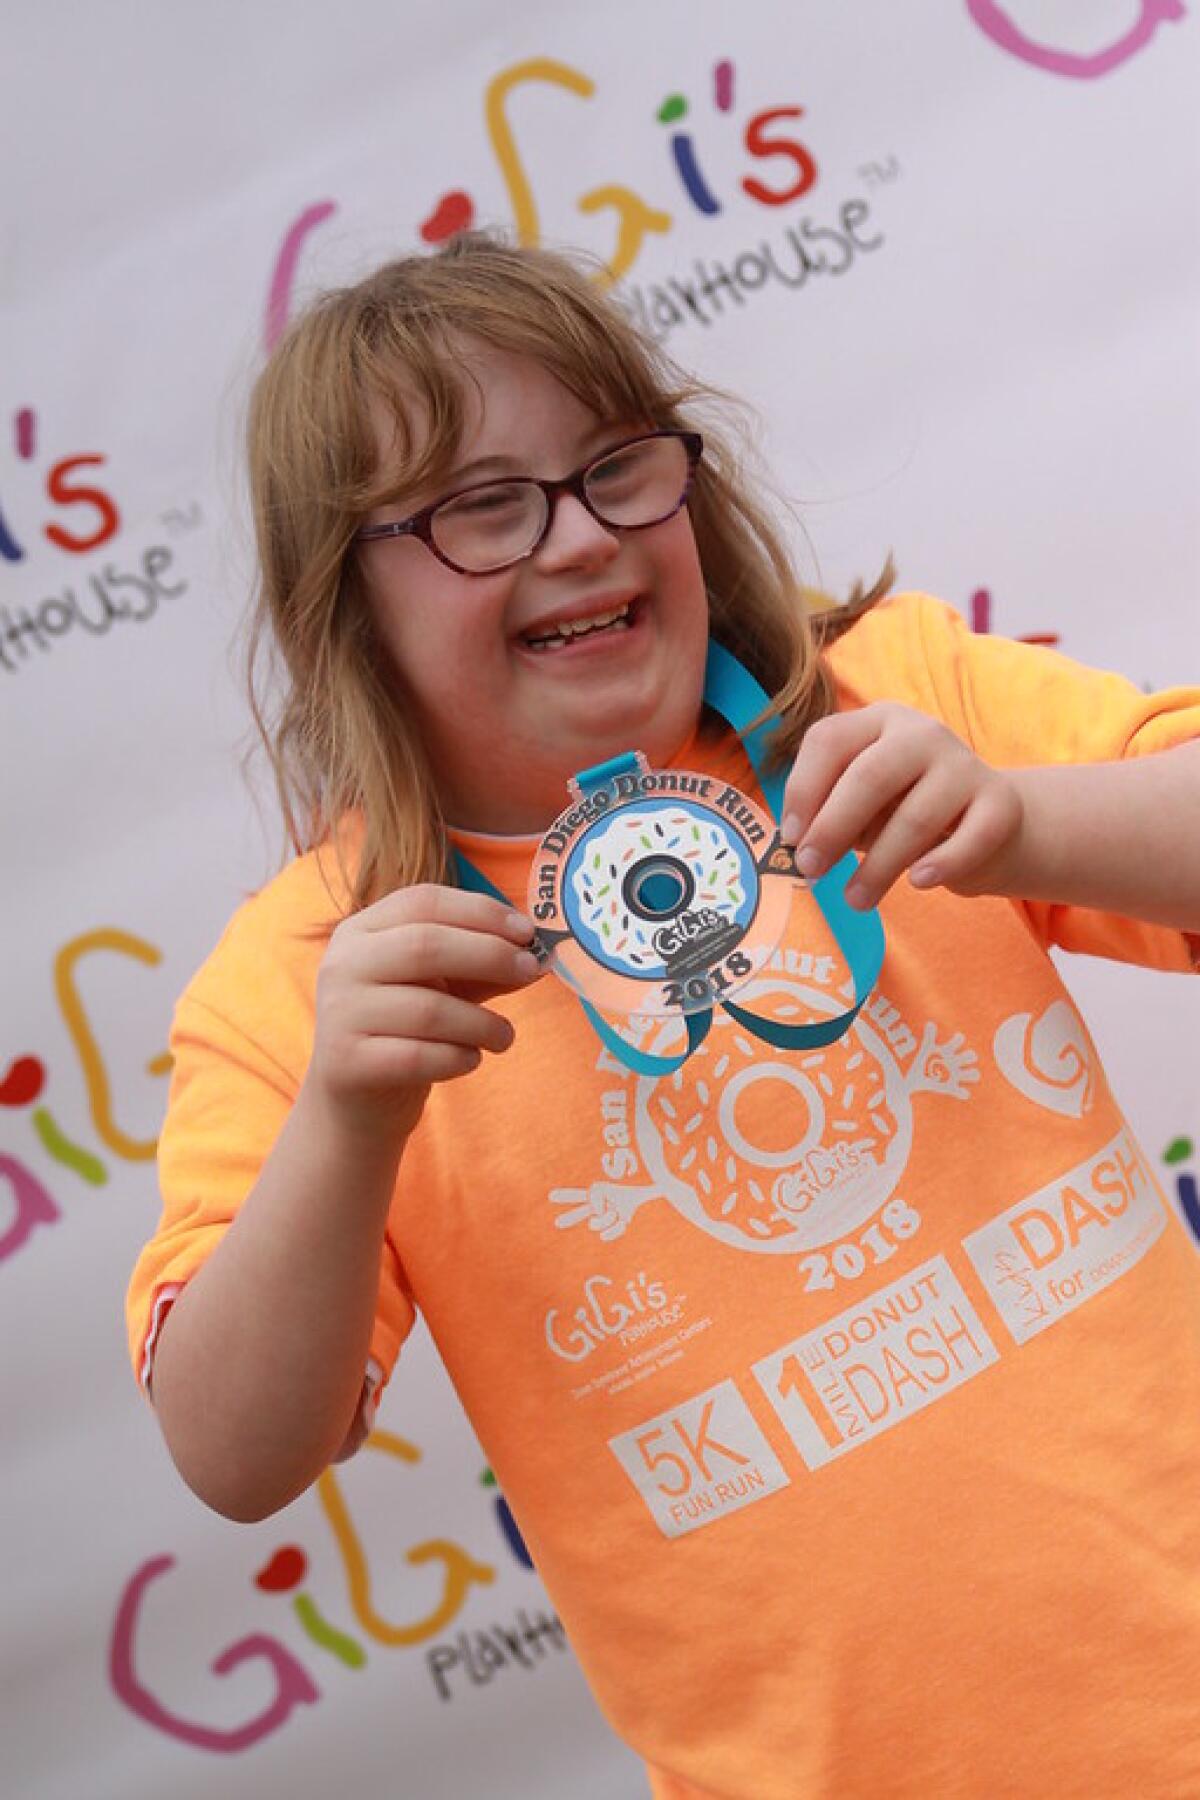 A participant of the inaugural San Diego Donut Run poses with her medal in 2018